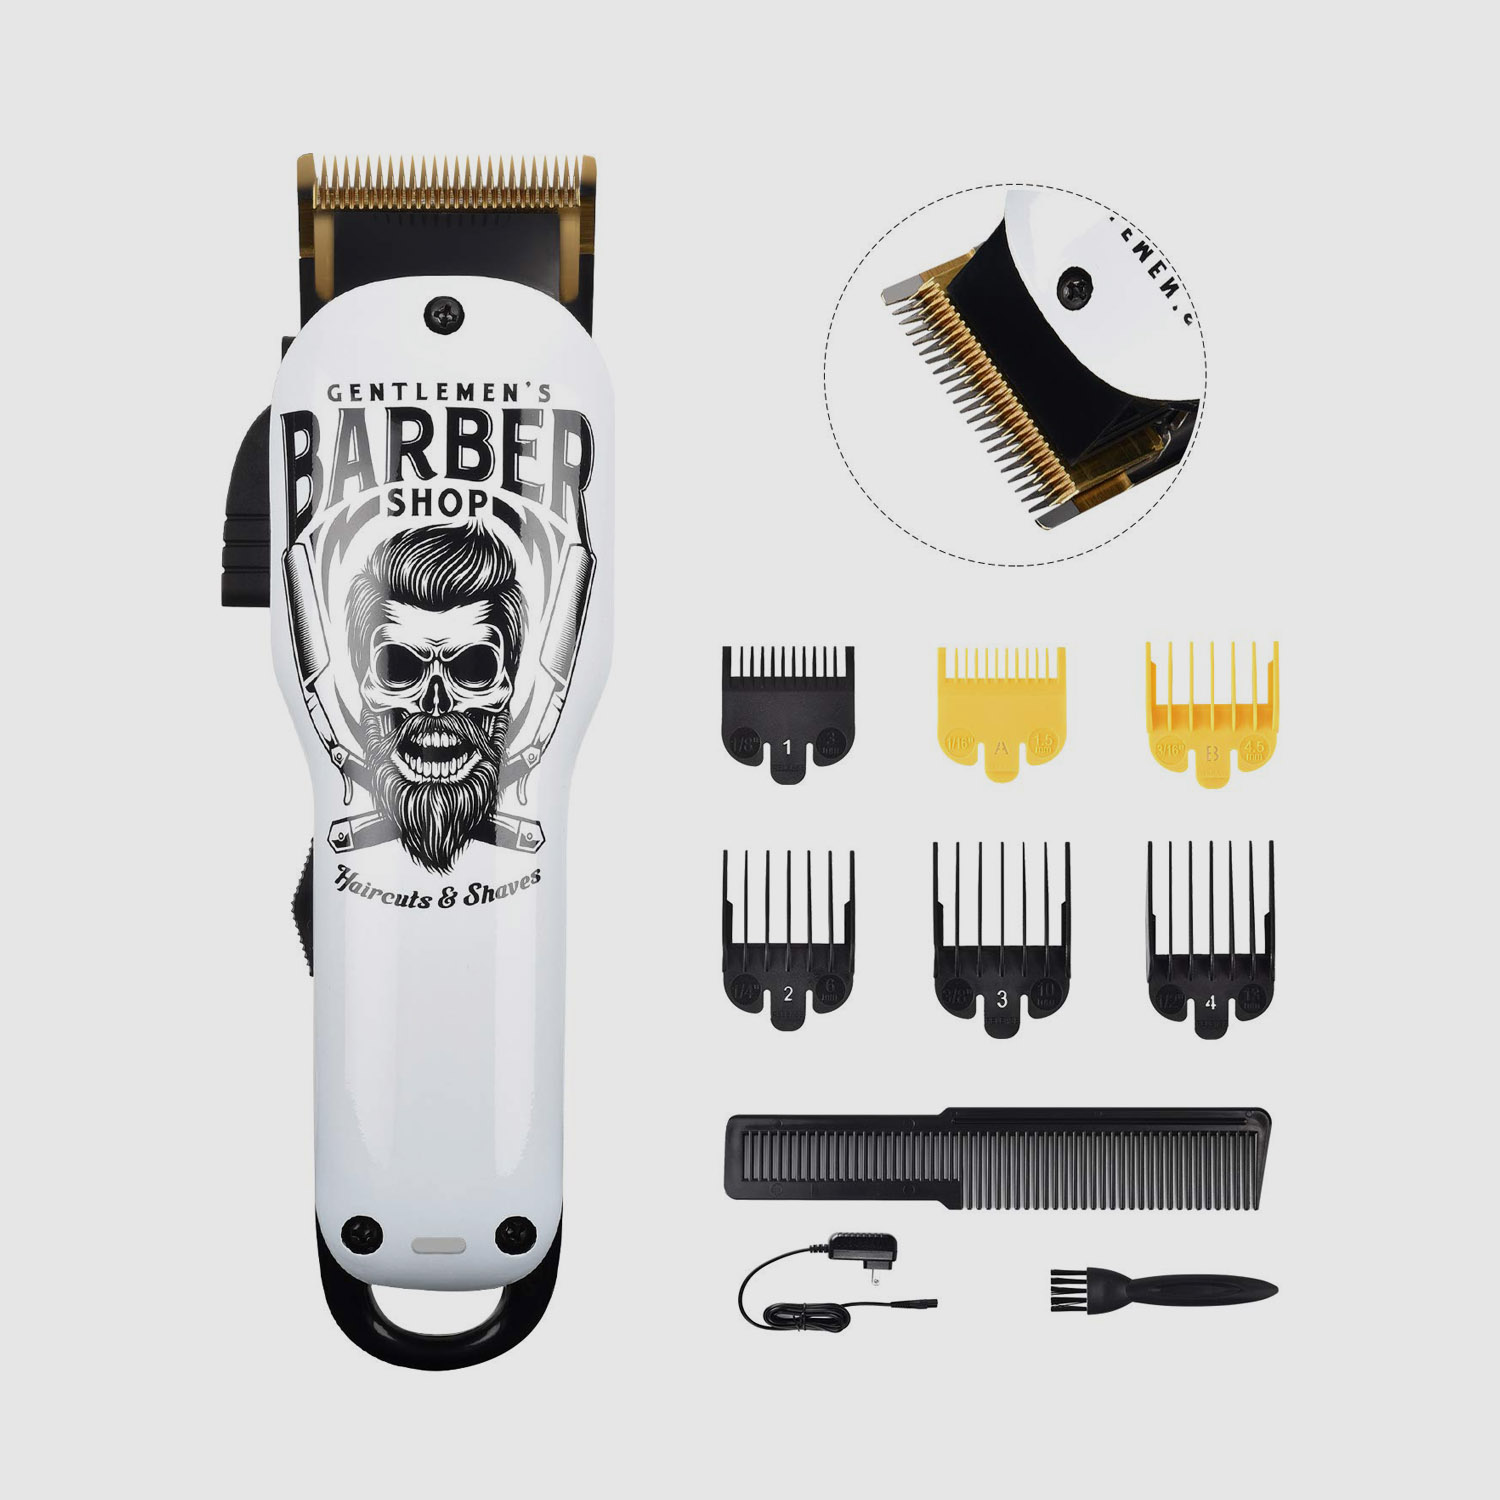 /professional-cordless-haircut-kit-rechargeable-2000mah-with-6-guide-combs.html